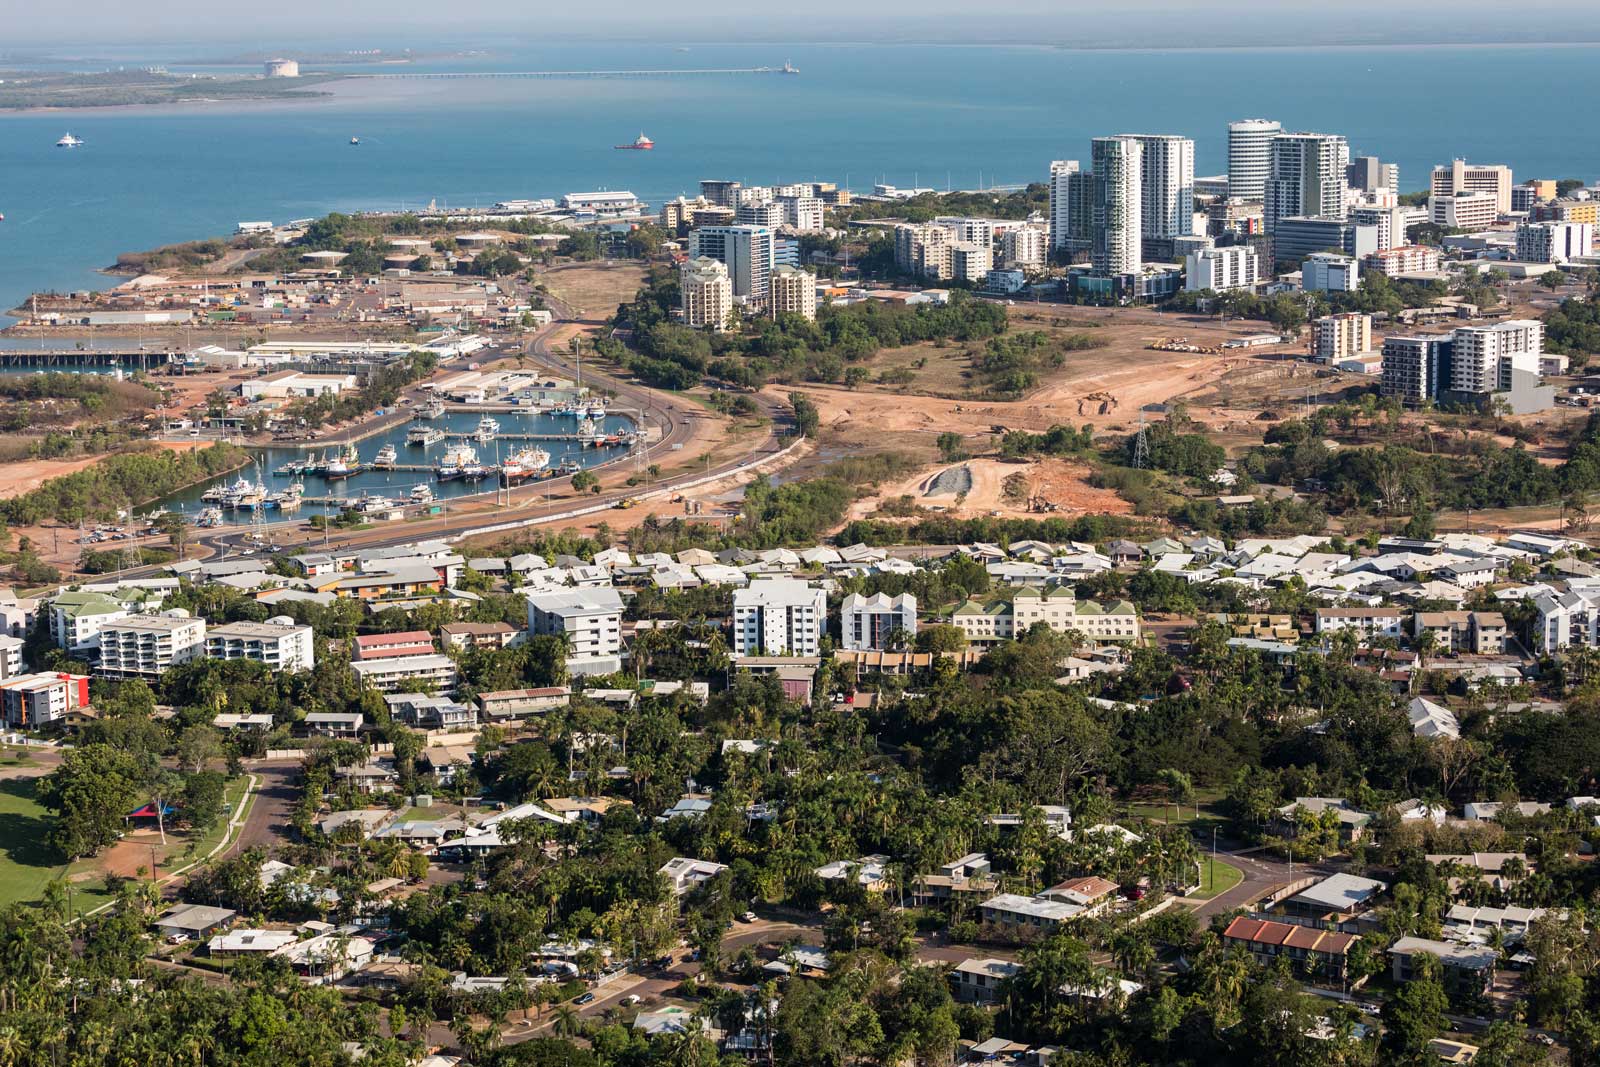 An aerial photo of Darwin, the capital city of the Northern Territory of Australia